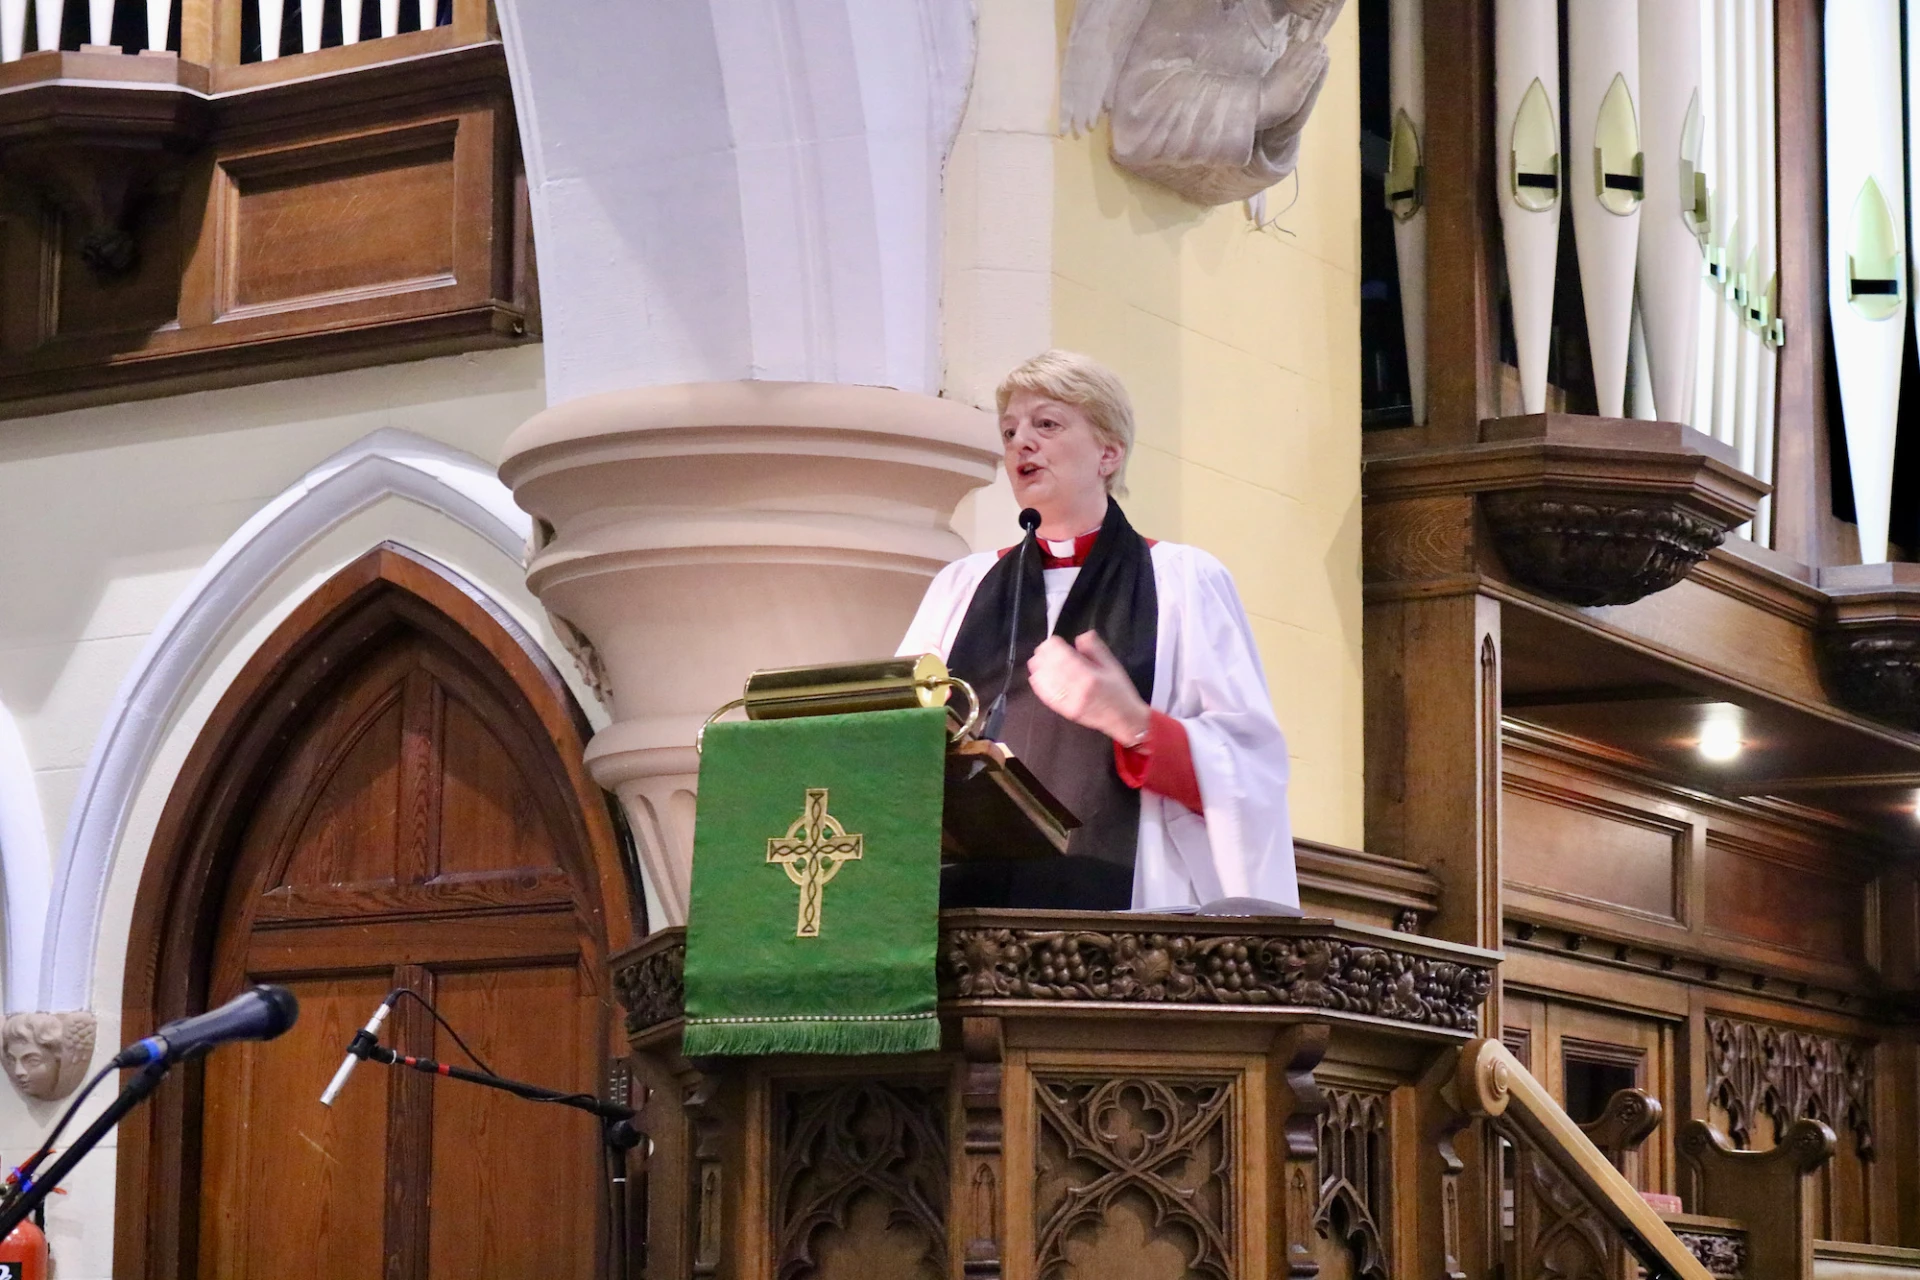 Canon Myrtle Morrison gives the address